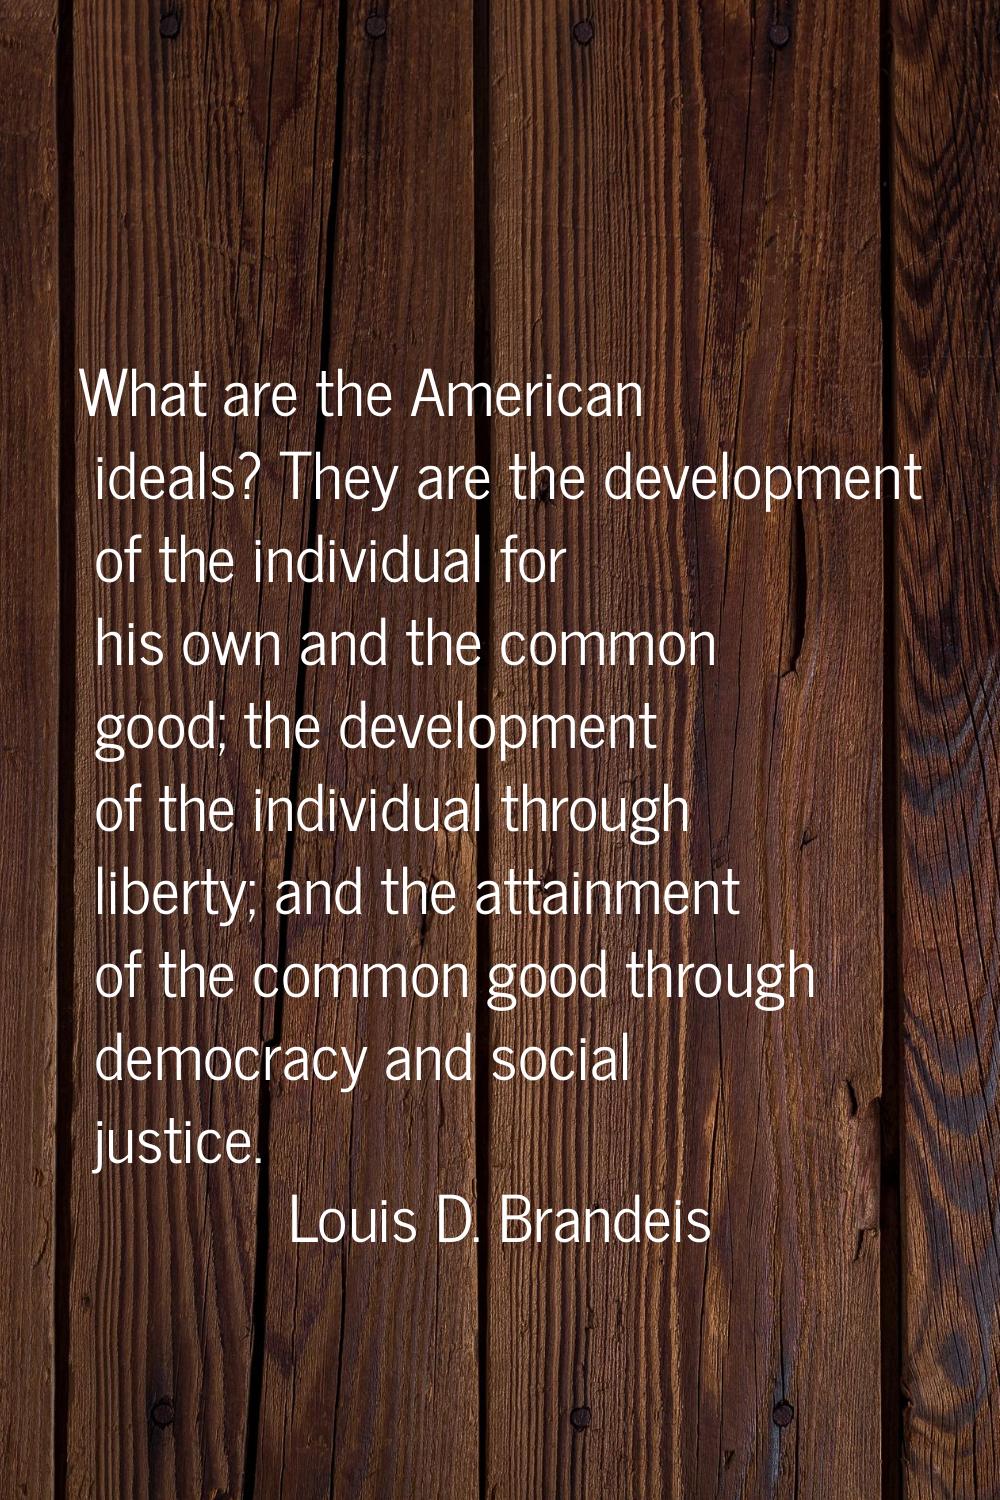 What are the American ideals? They are the development of the individual for his own and the common